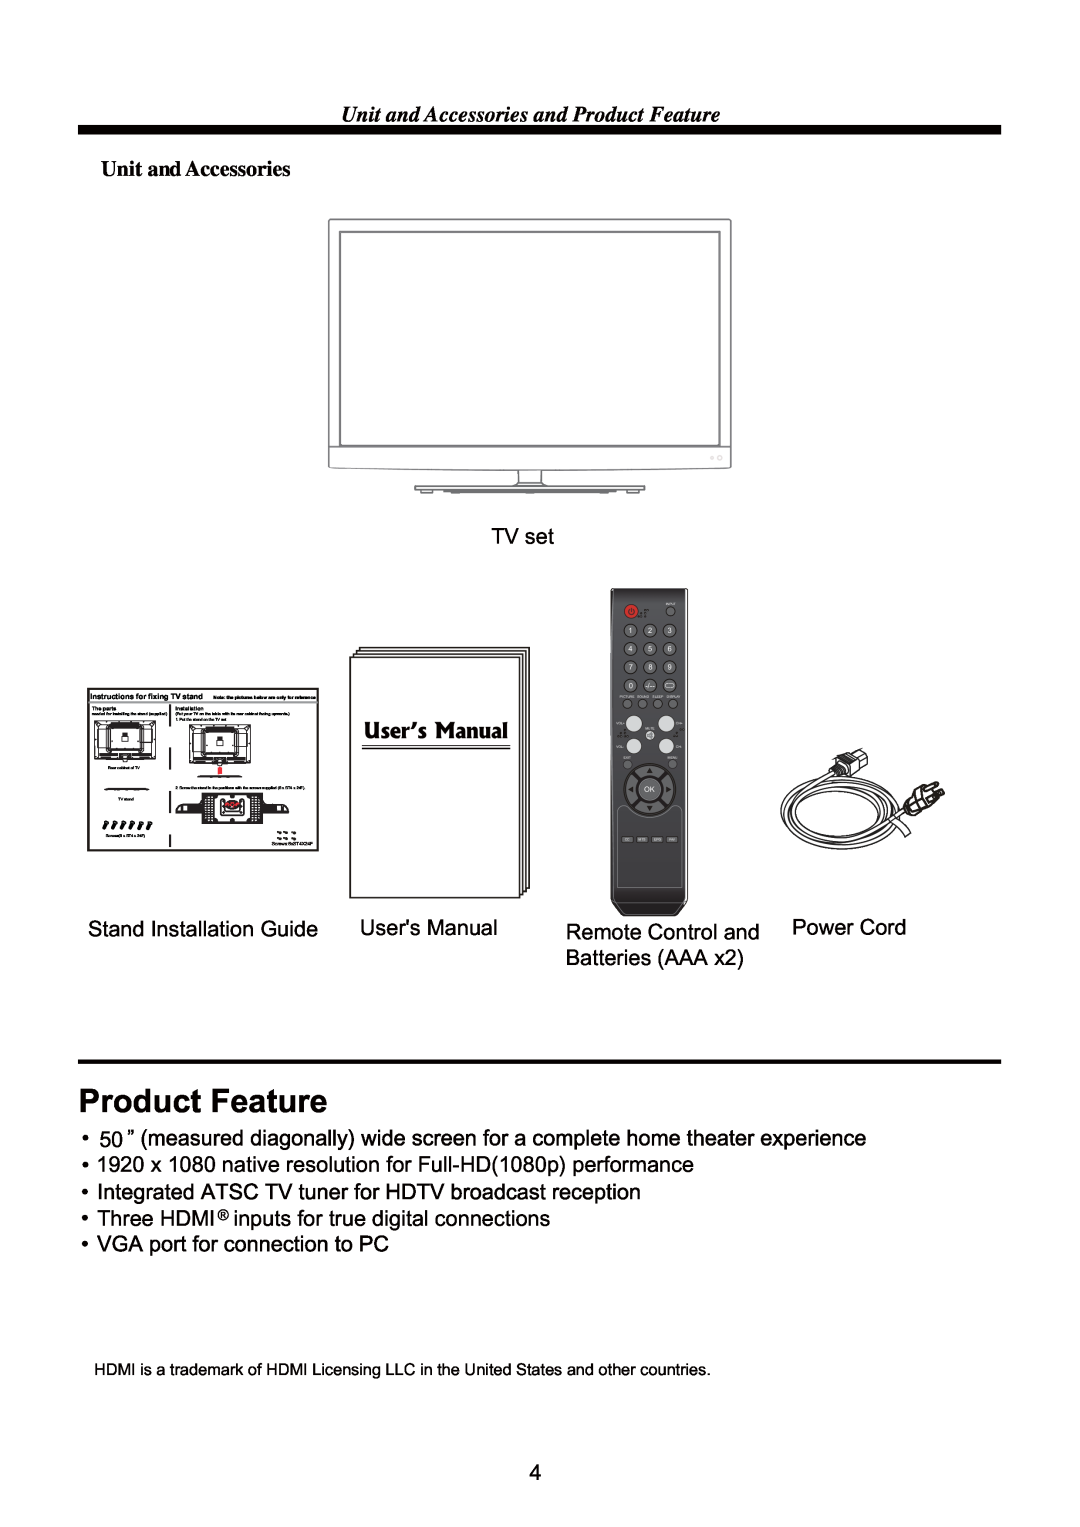 ProScan PLCD5085A Unit and Accessories and Product Feature, Instructions for fixing TV stand, 1 2 4 5 7, The parts 